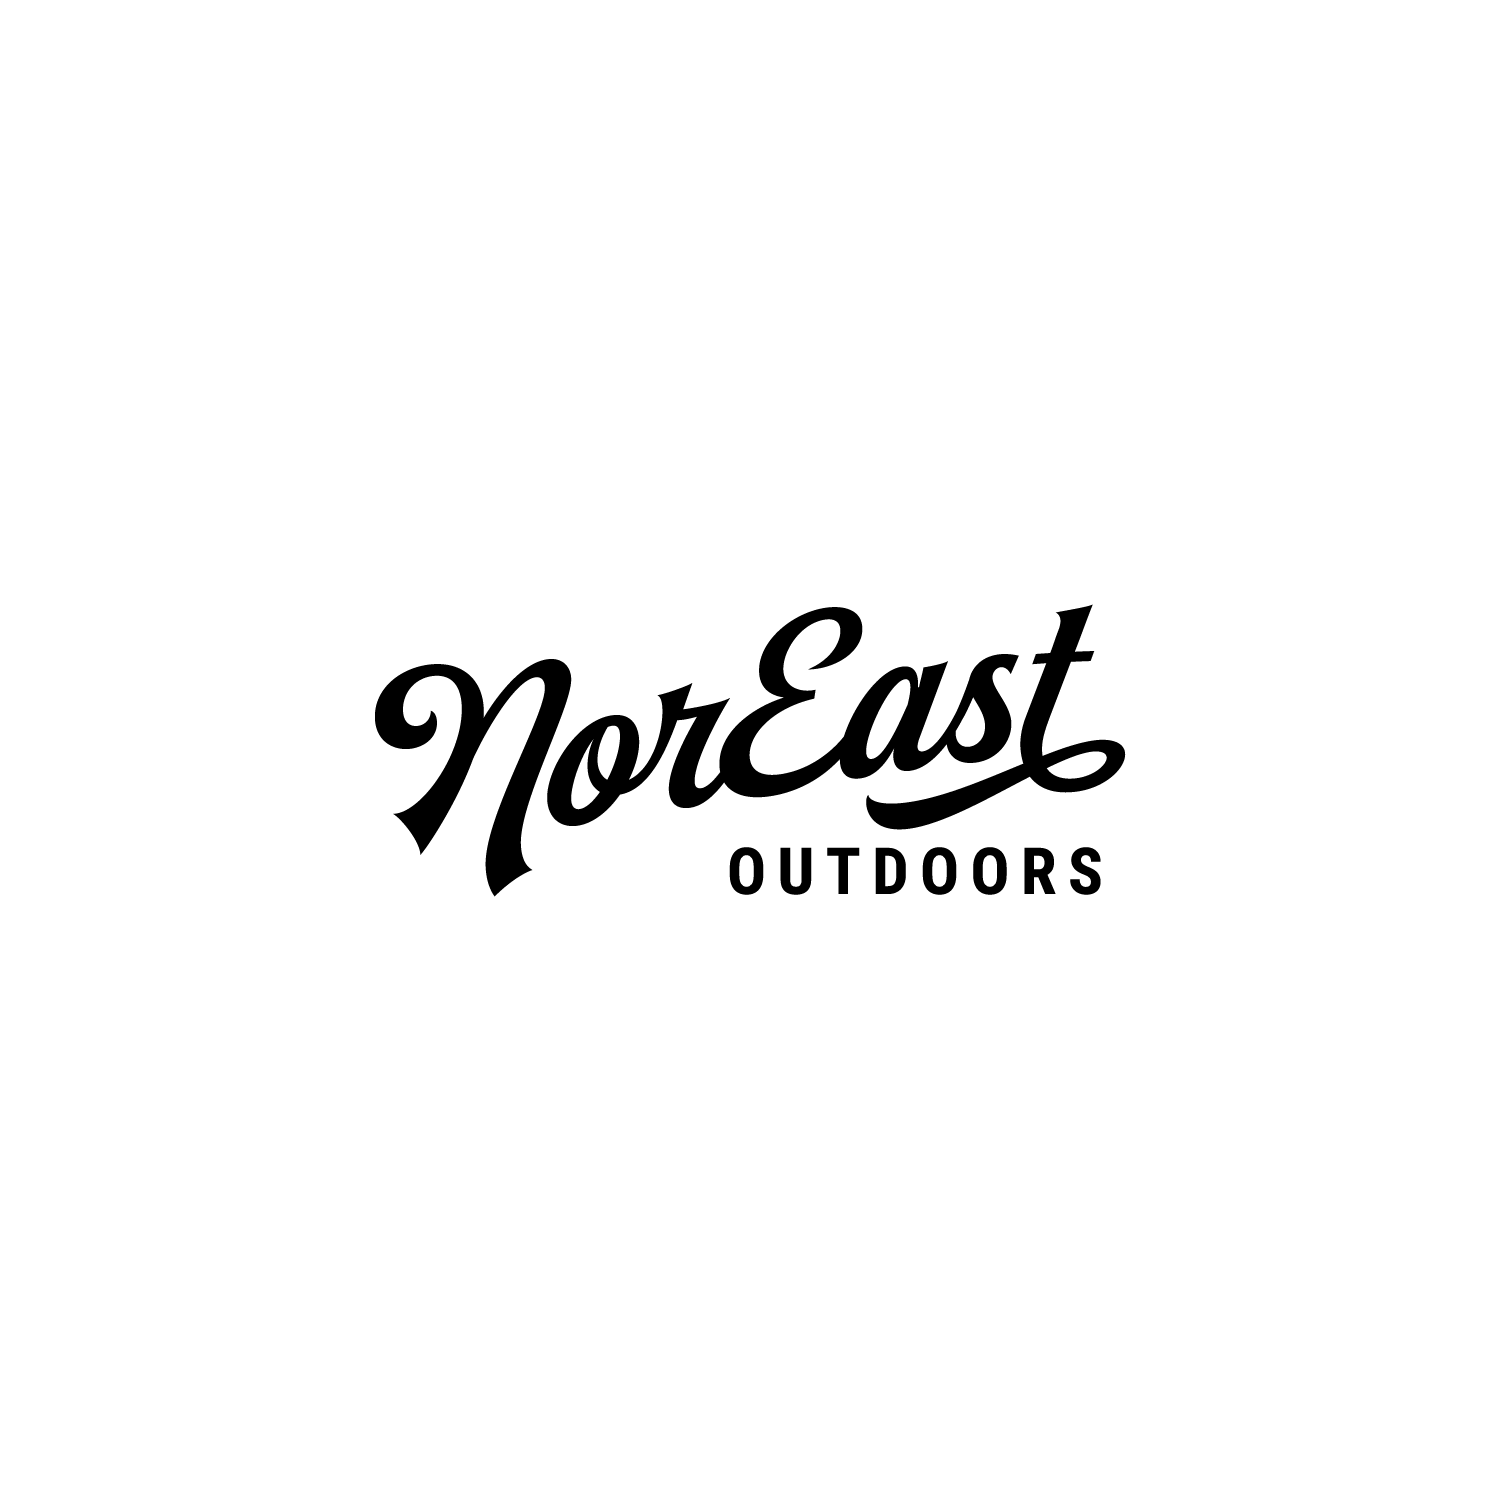 Noreast Outdoors logo by OLSON MCINTYRE